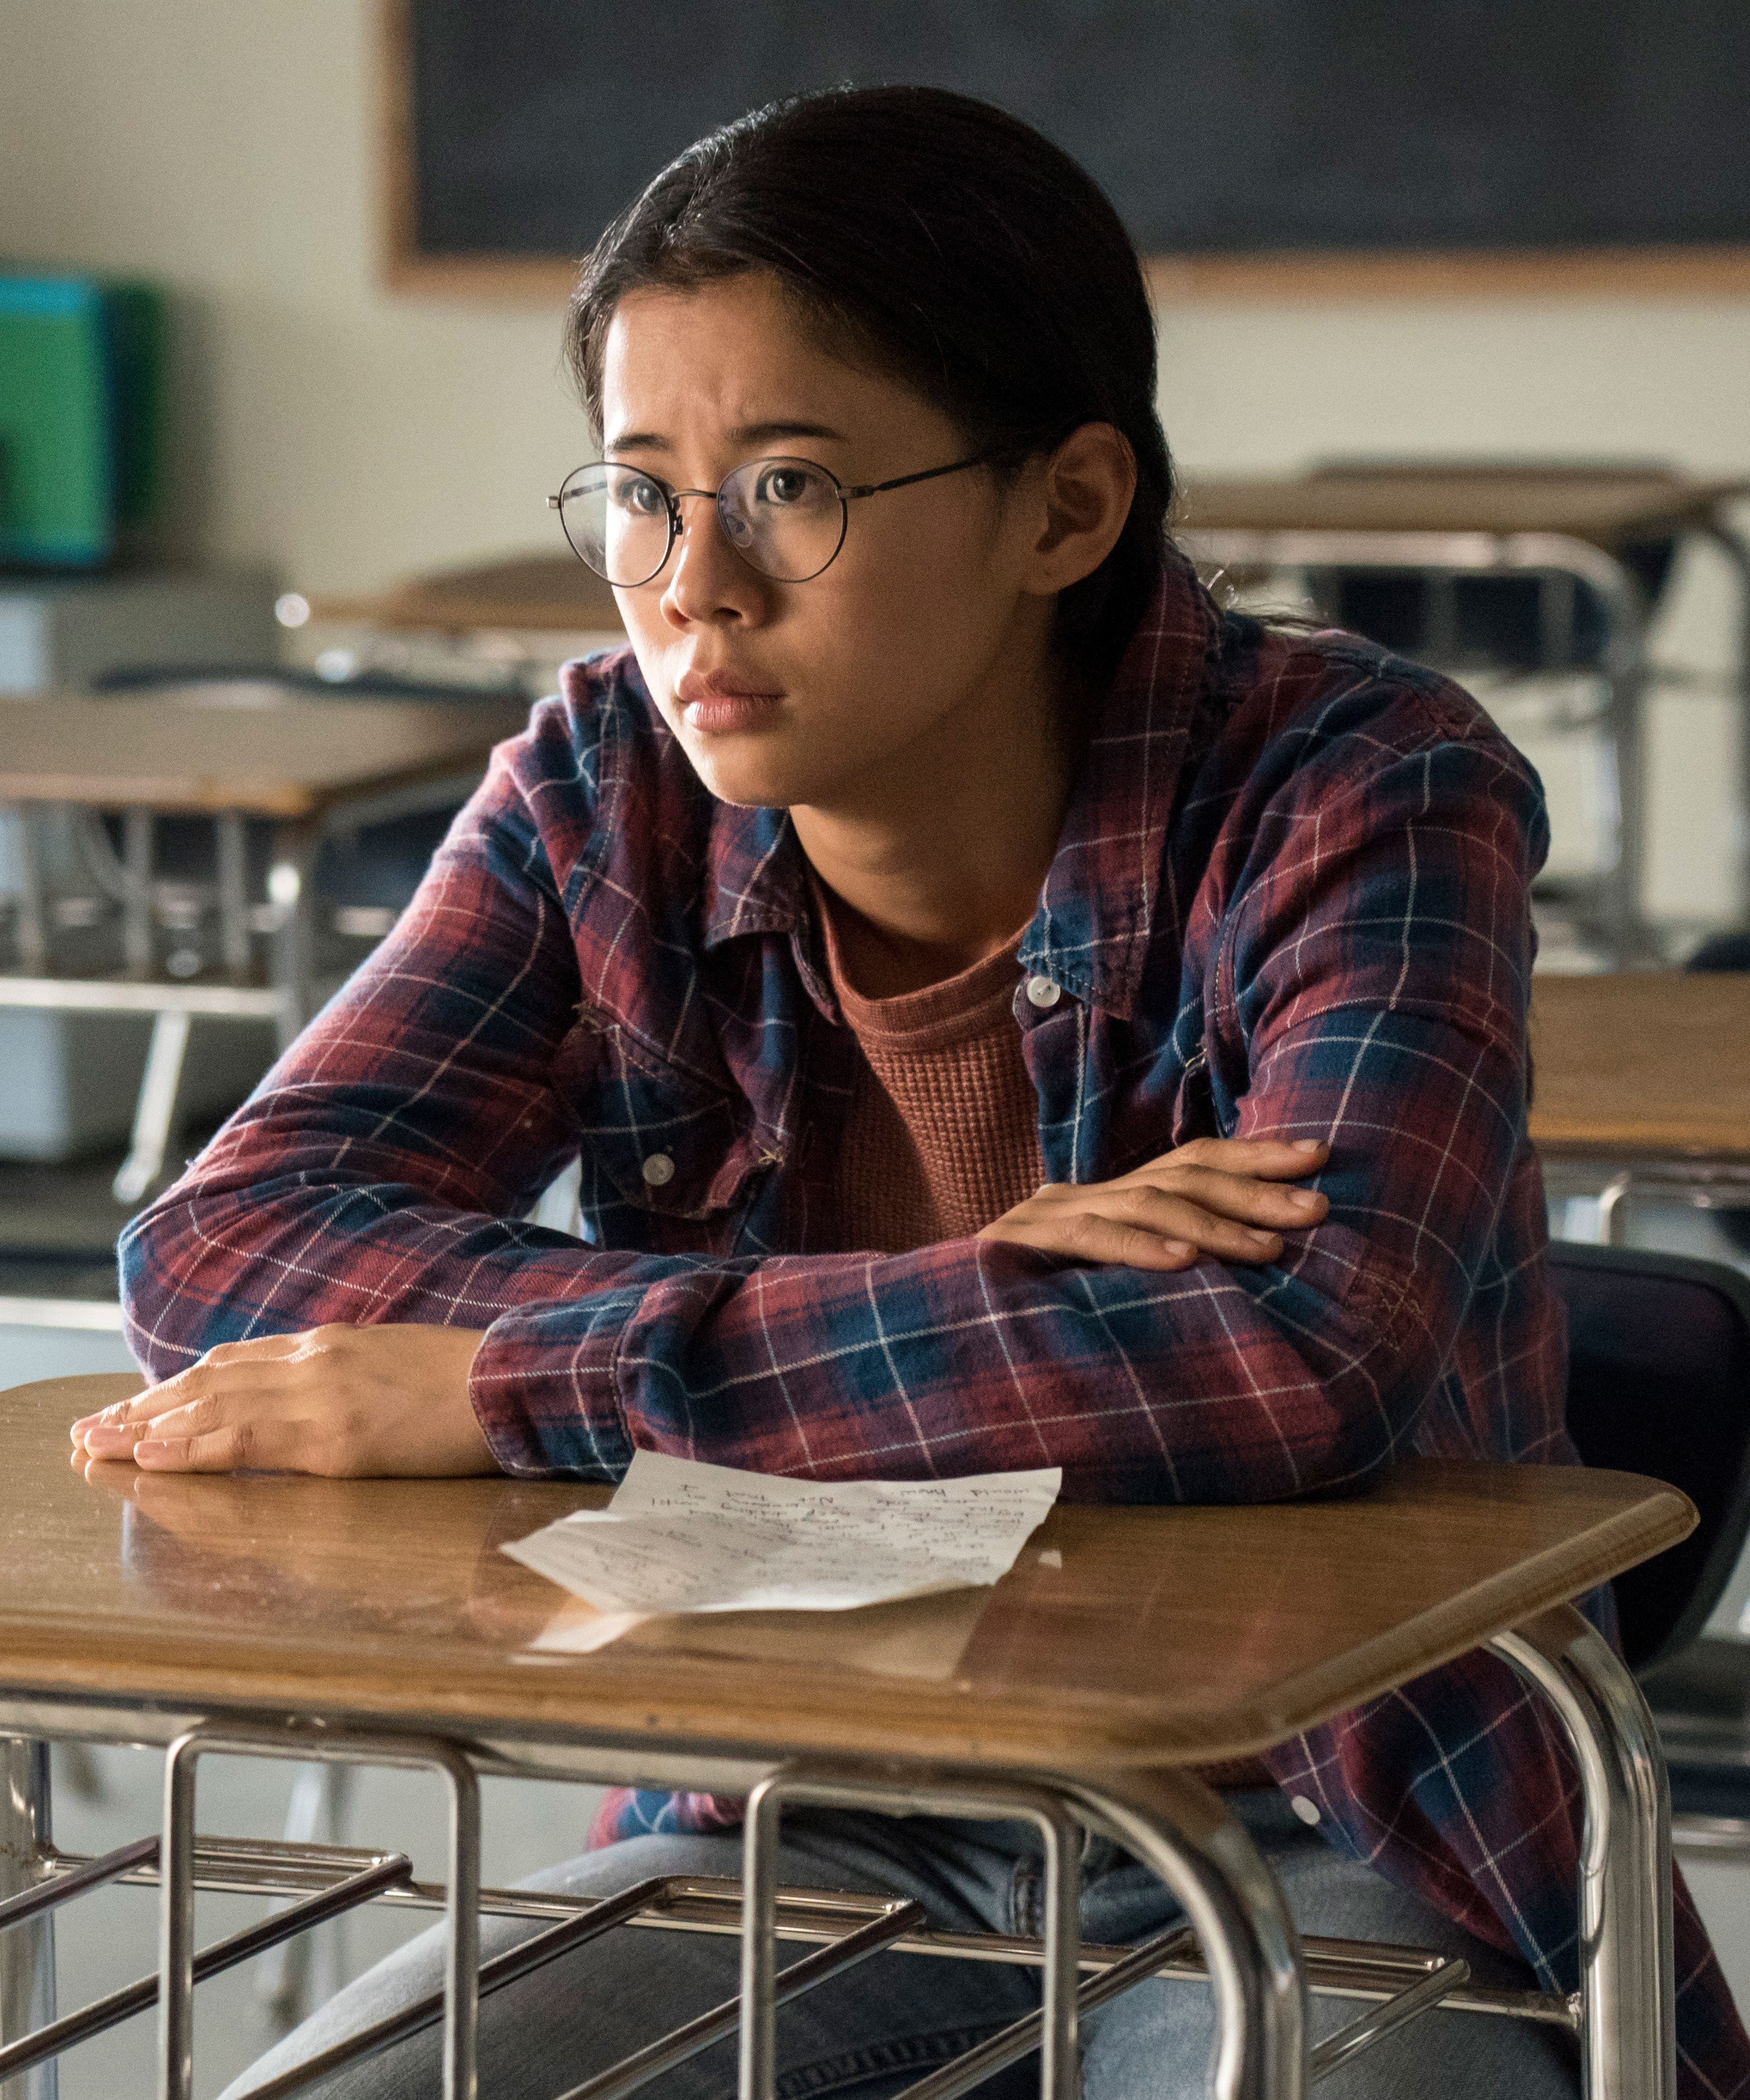 Asian Lesbians School - Best Coming-Of-Age Movies About Growing Up, Adulting